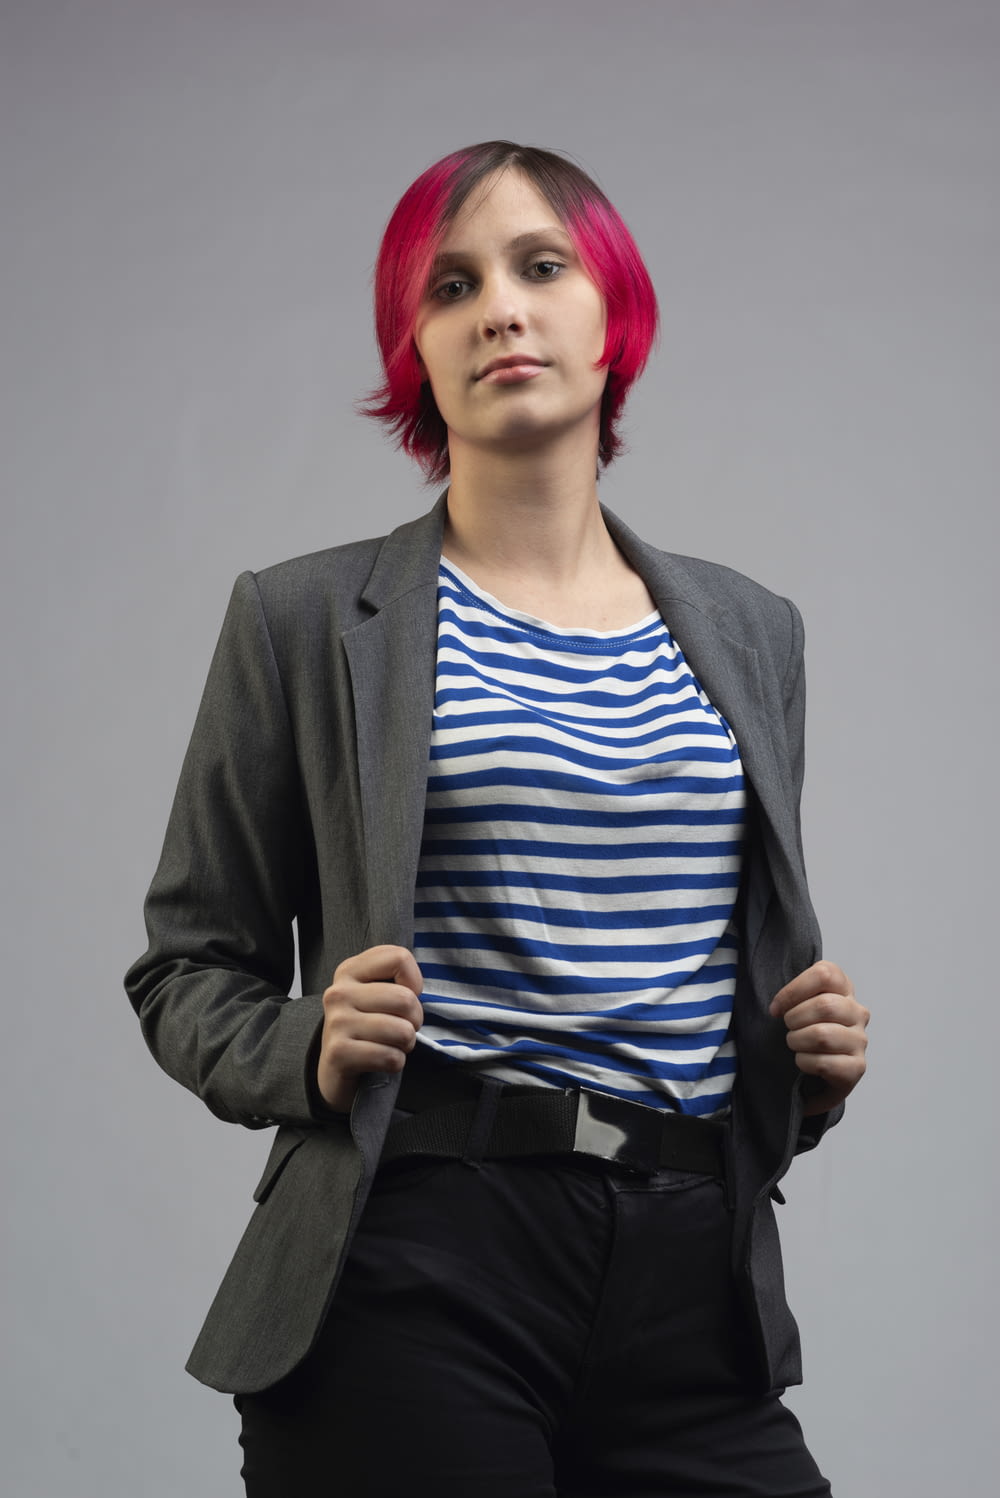 a woman with pink hair and a striped shirt